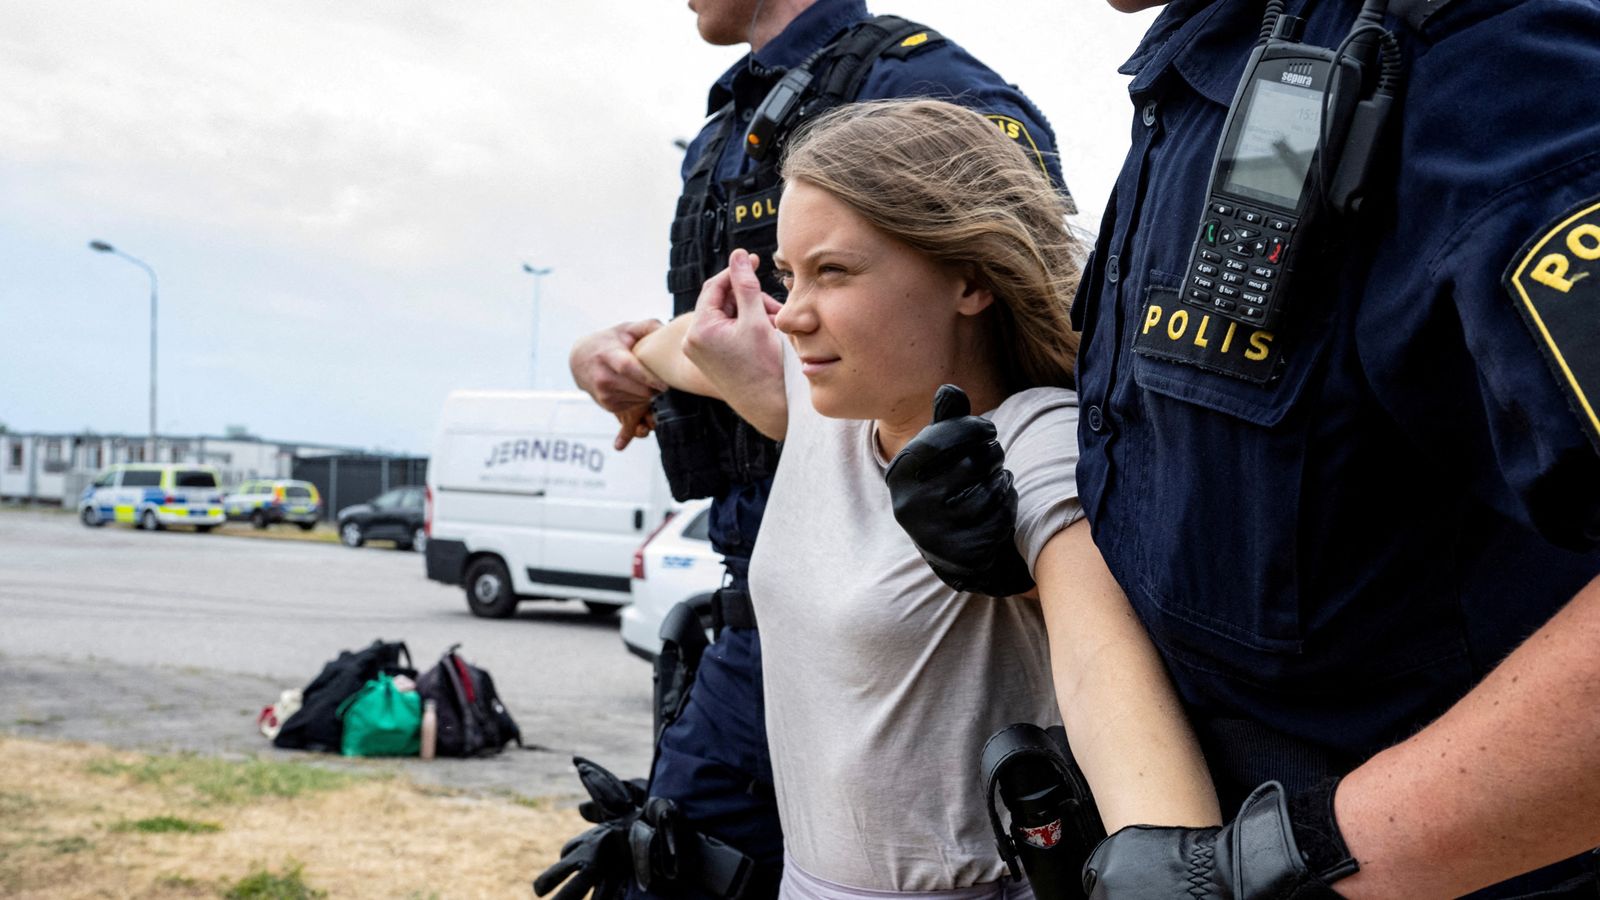 Greta Thunberg: Climate activist charged with disobeying police order at protest